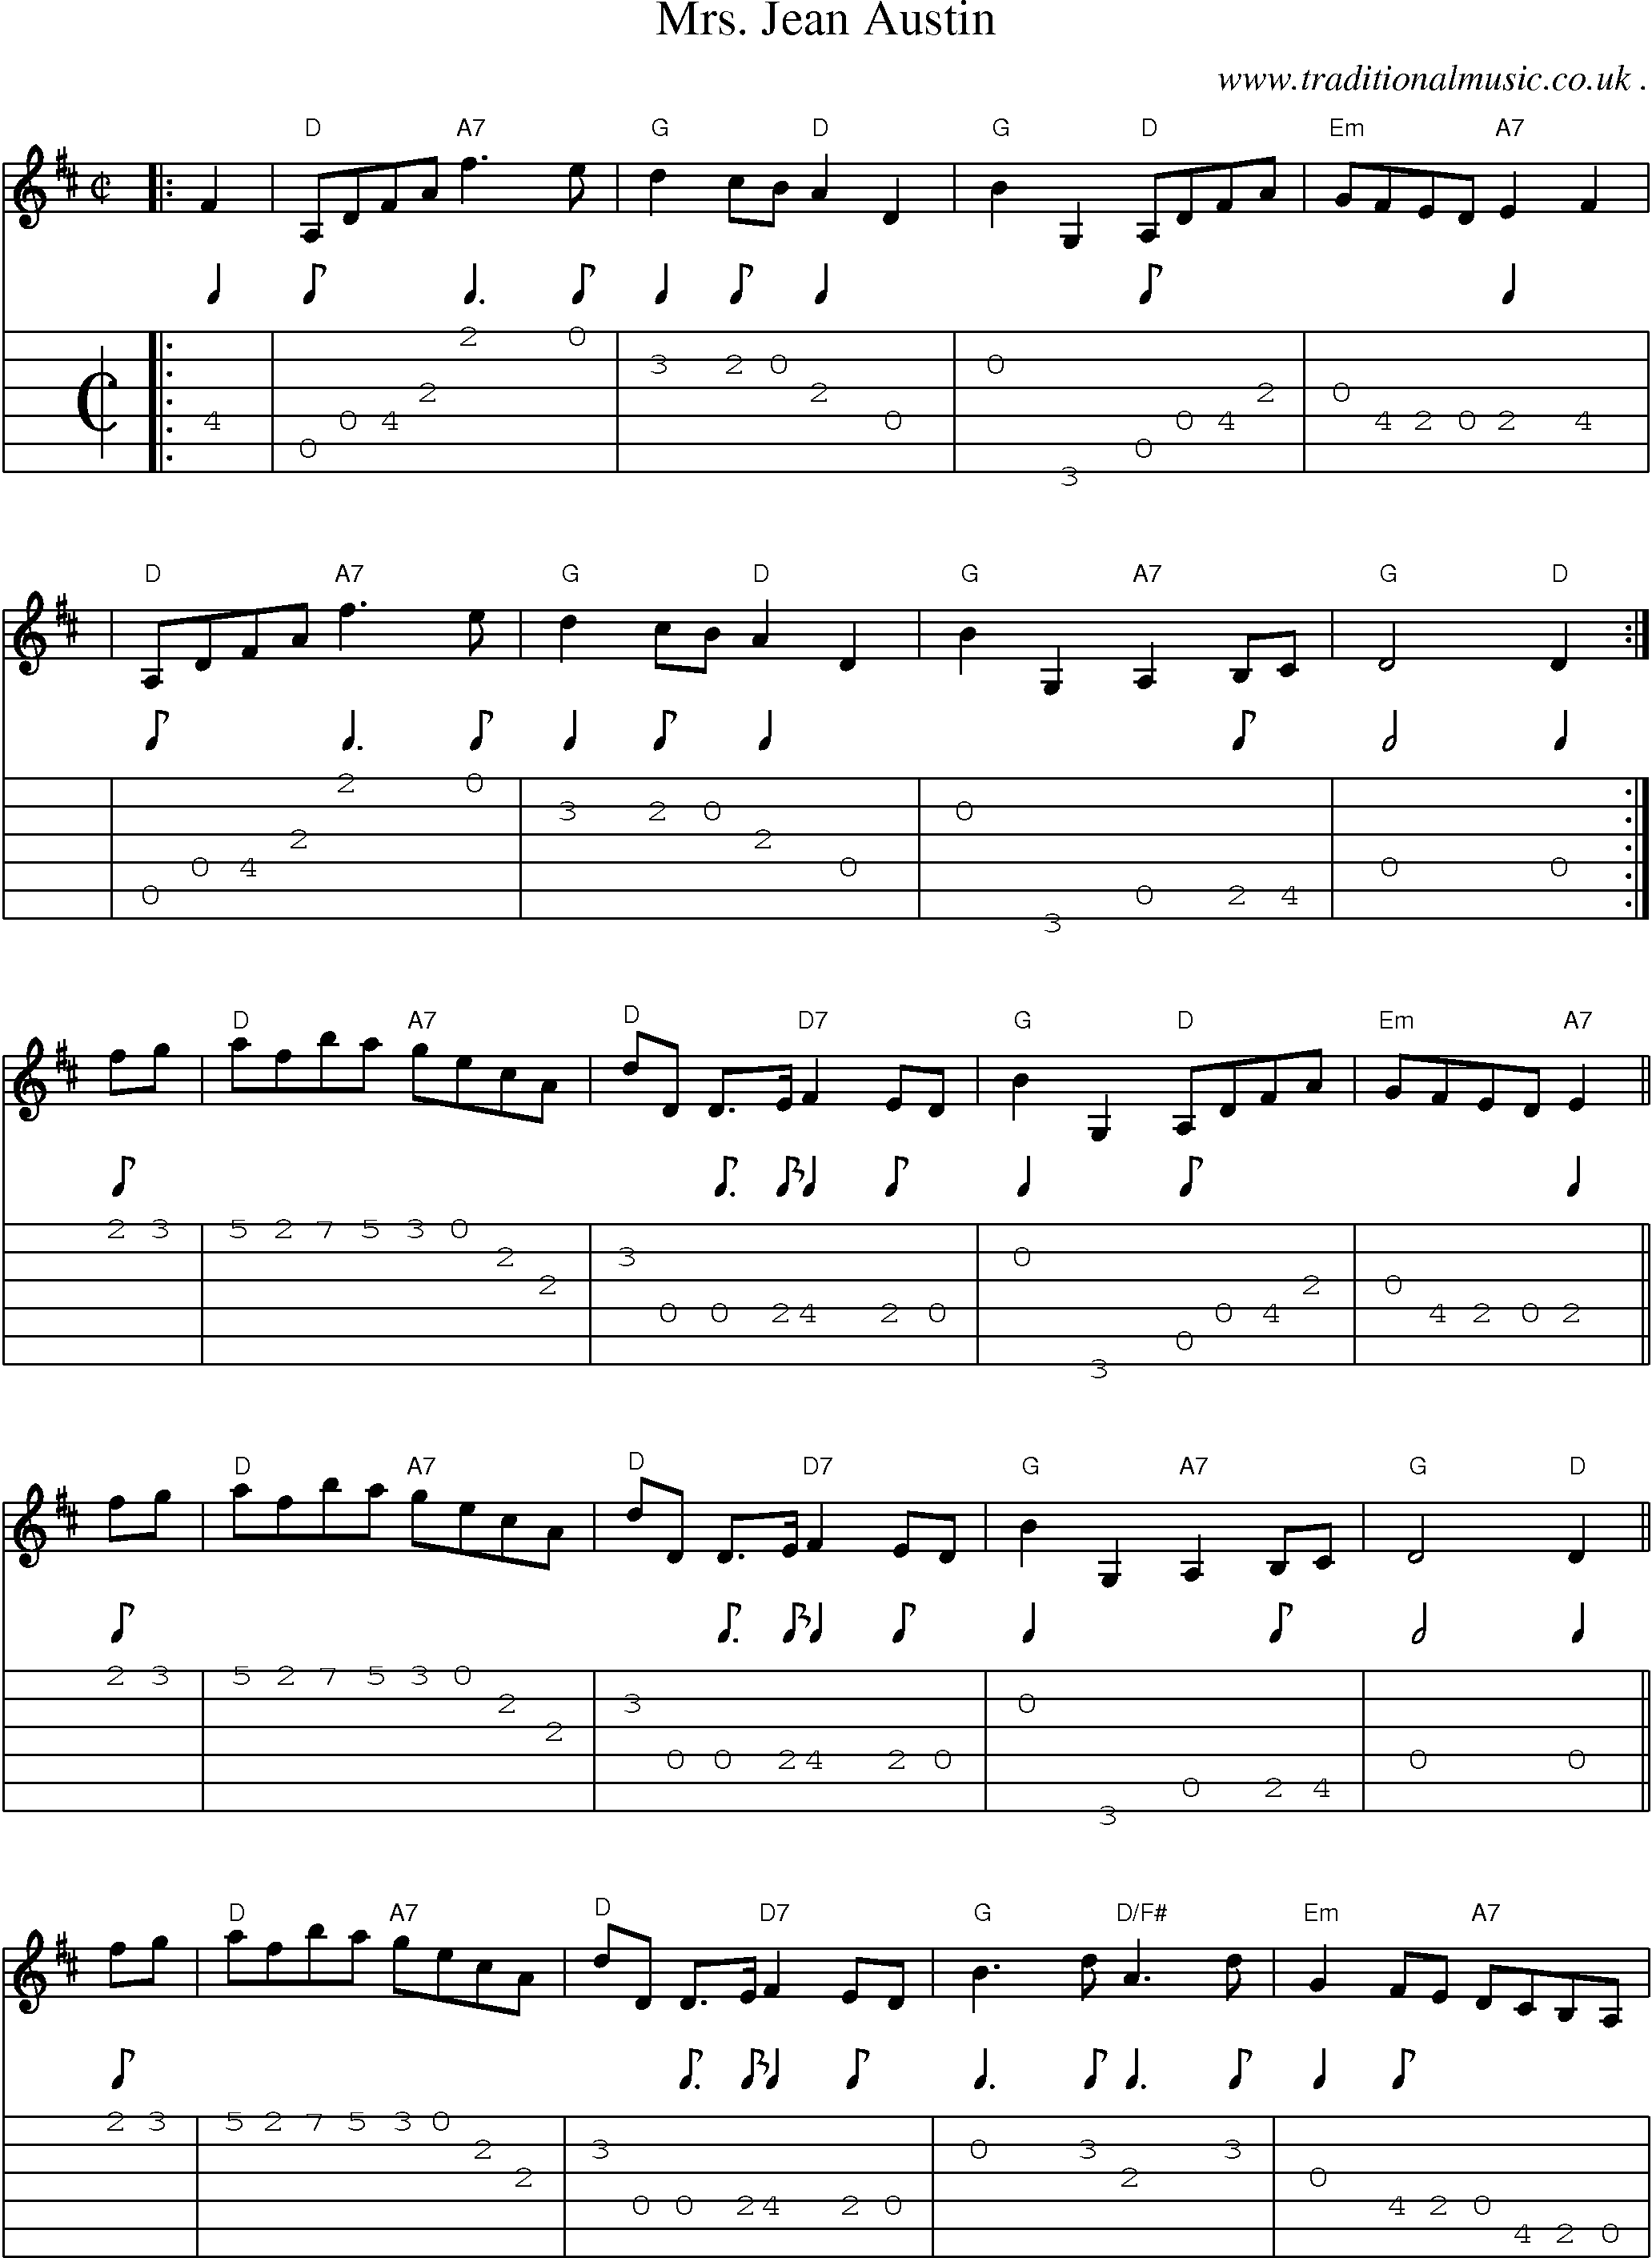 Sheet-music  score, Chords and Guitar Tabs for Mrs Jean Austin